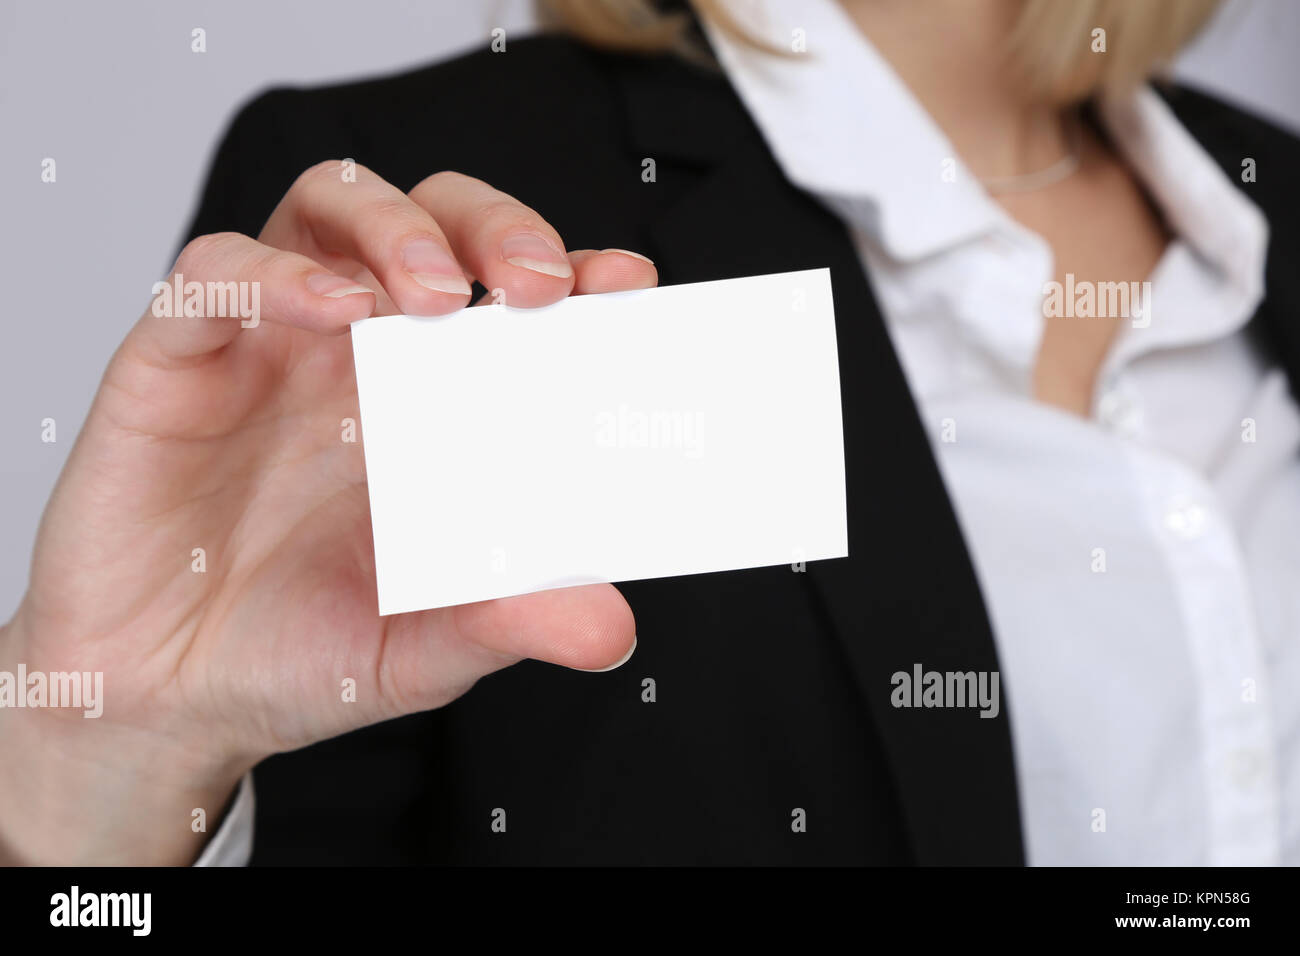 business contact hand showing empty plate empty copy space copyspace business concept Stock Photo